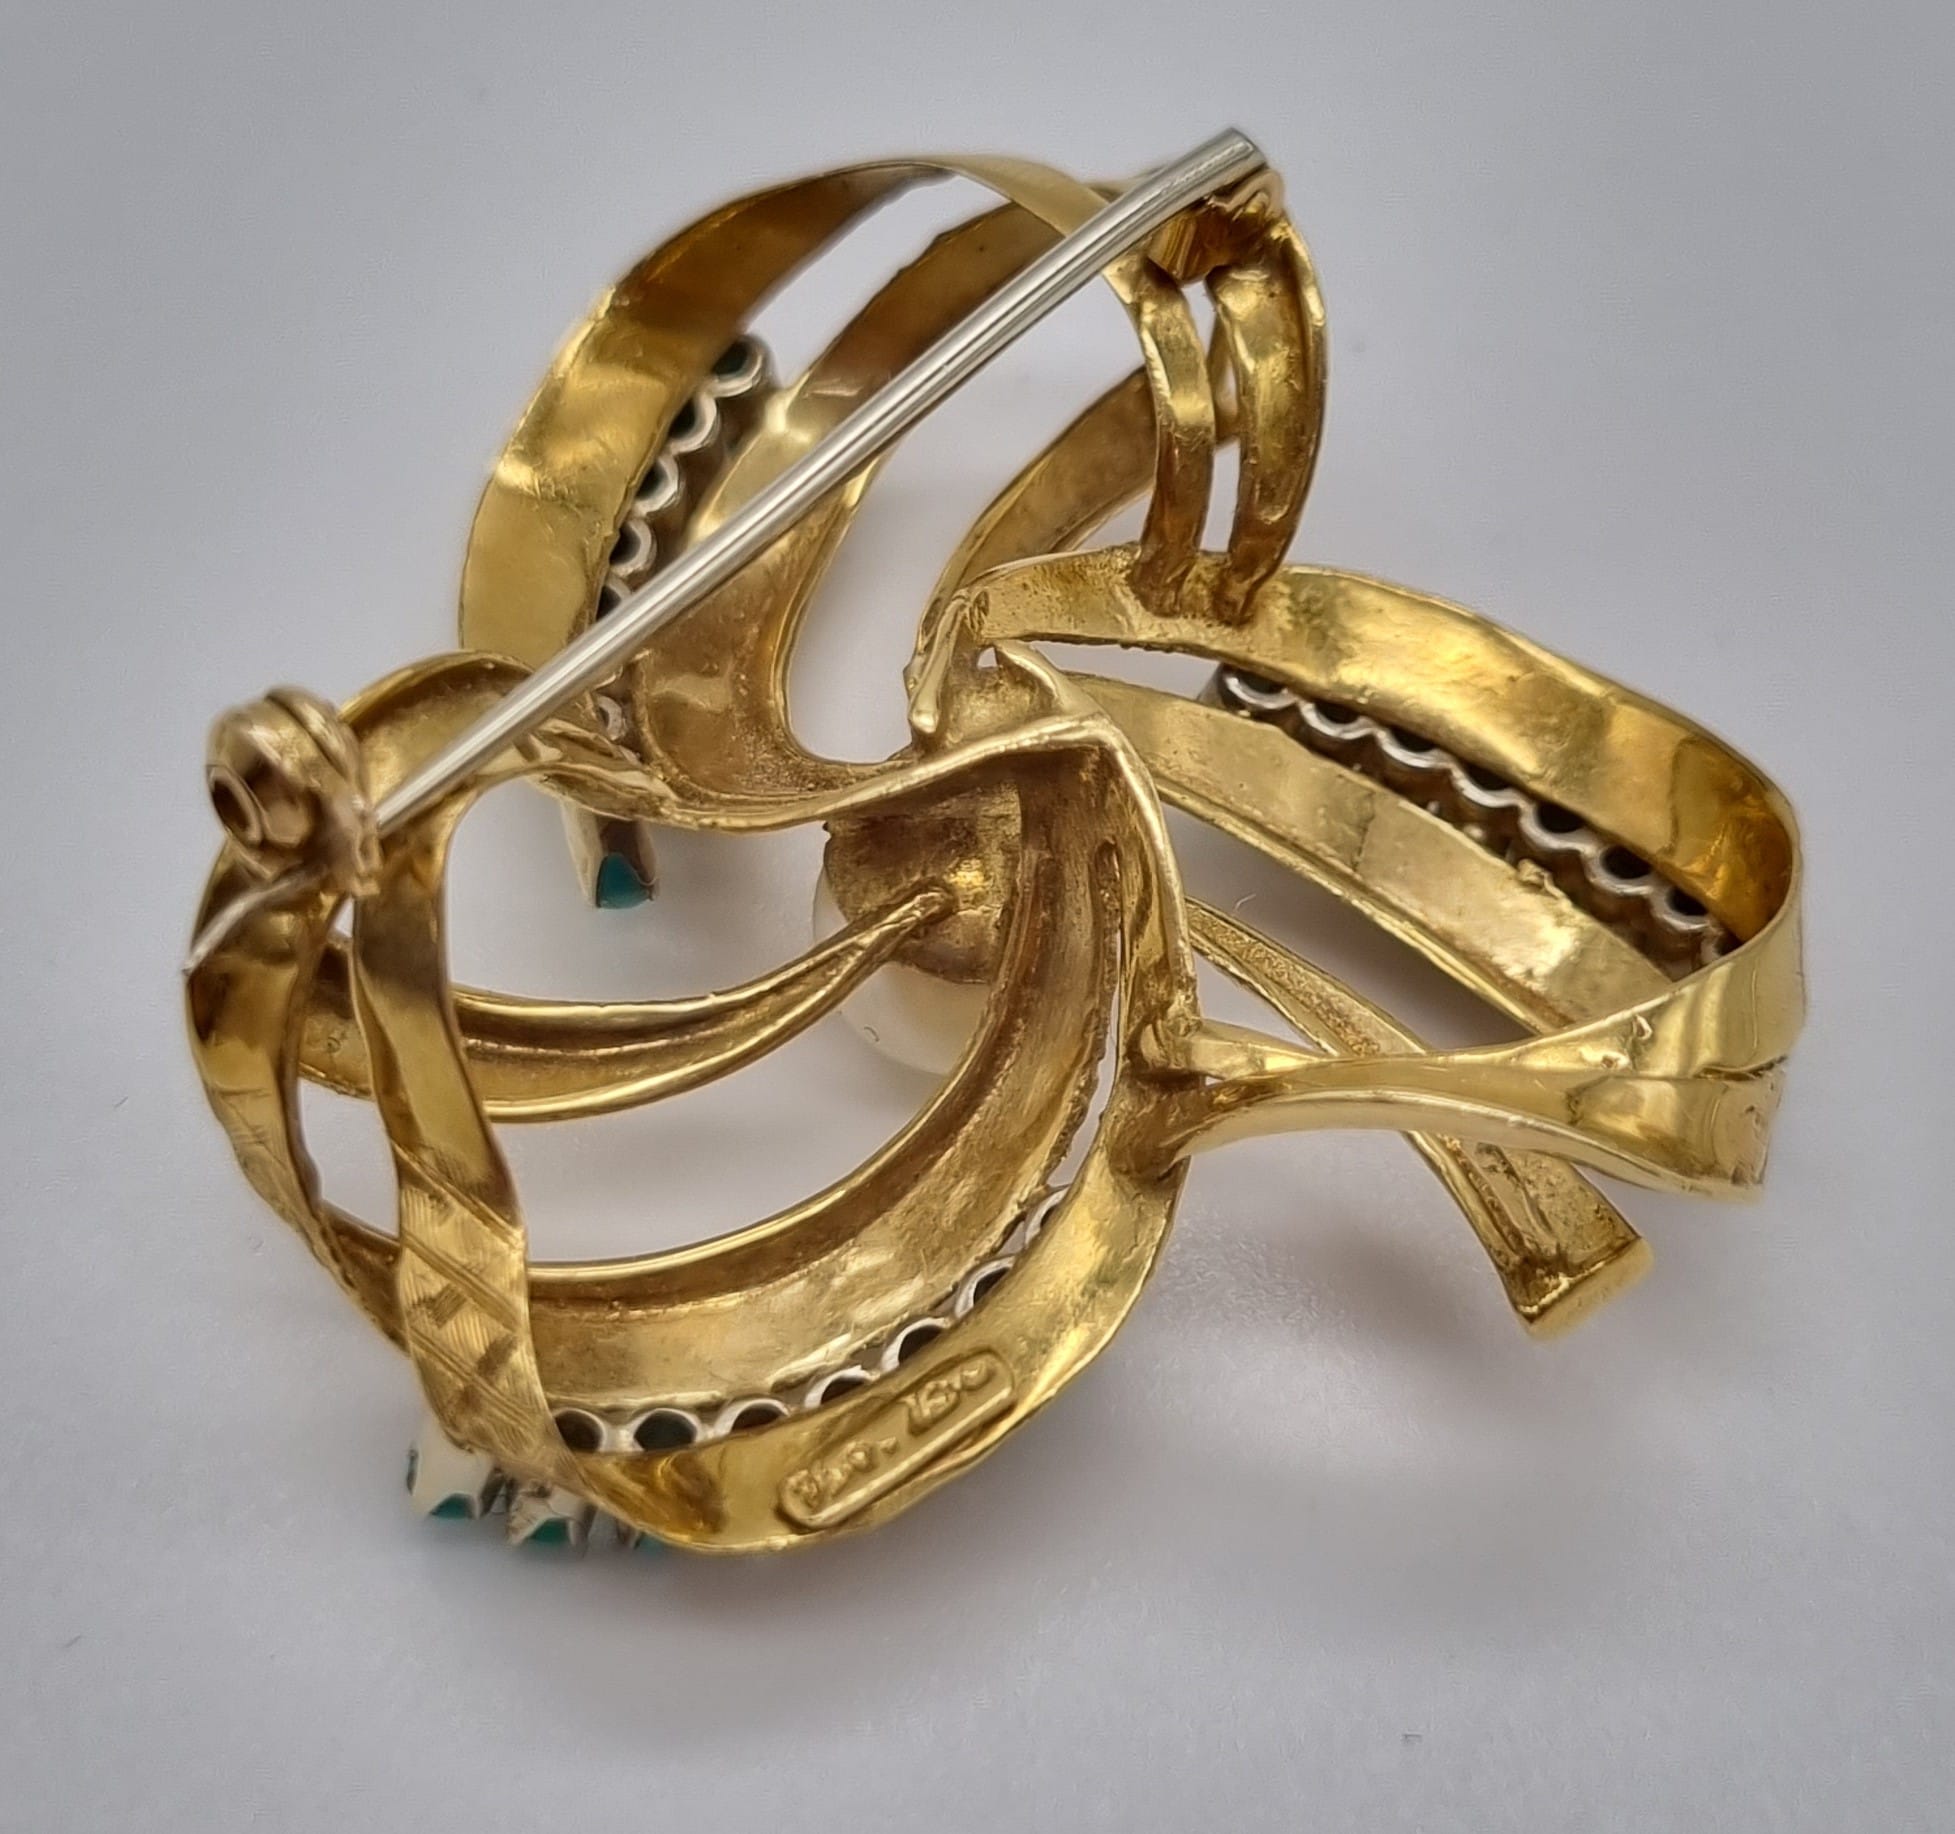 A Wonderful Vintage Possibly Antique 18K Yellow Gold, Turquoise and Pearl Ring/Brooch Set. Ring - - Image 13 of 13